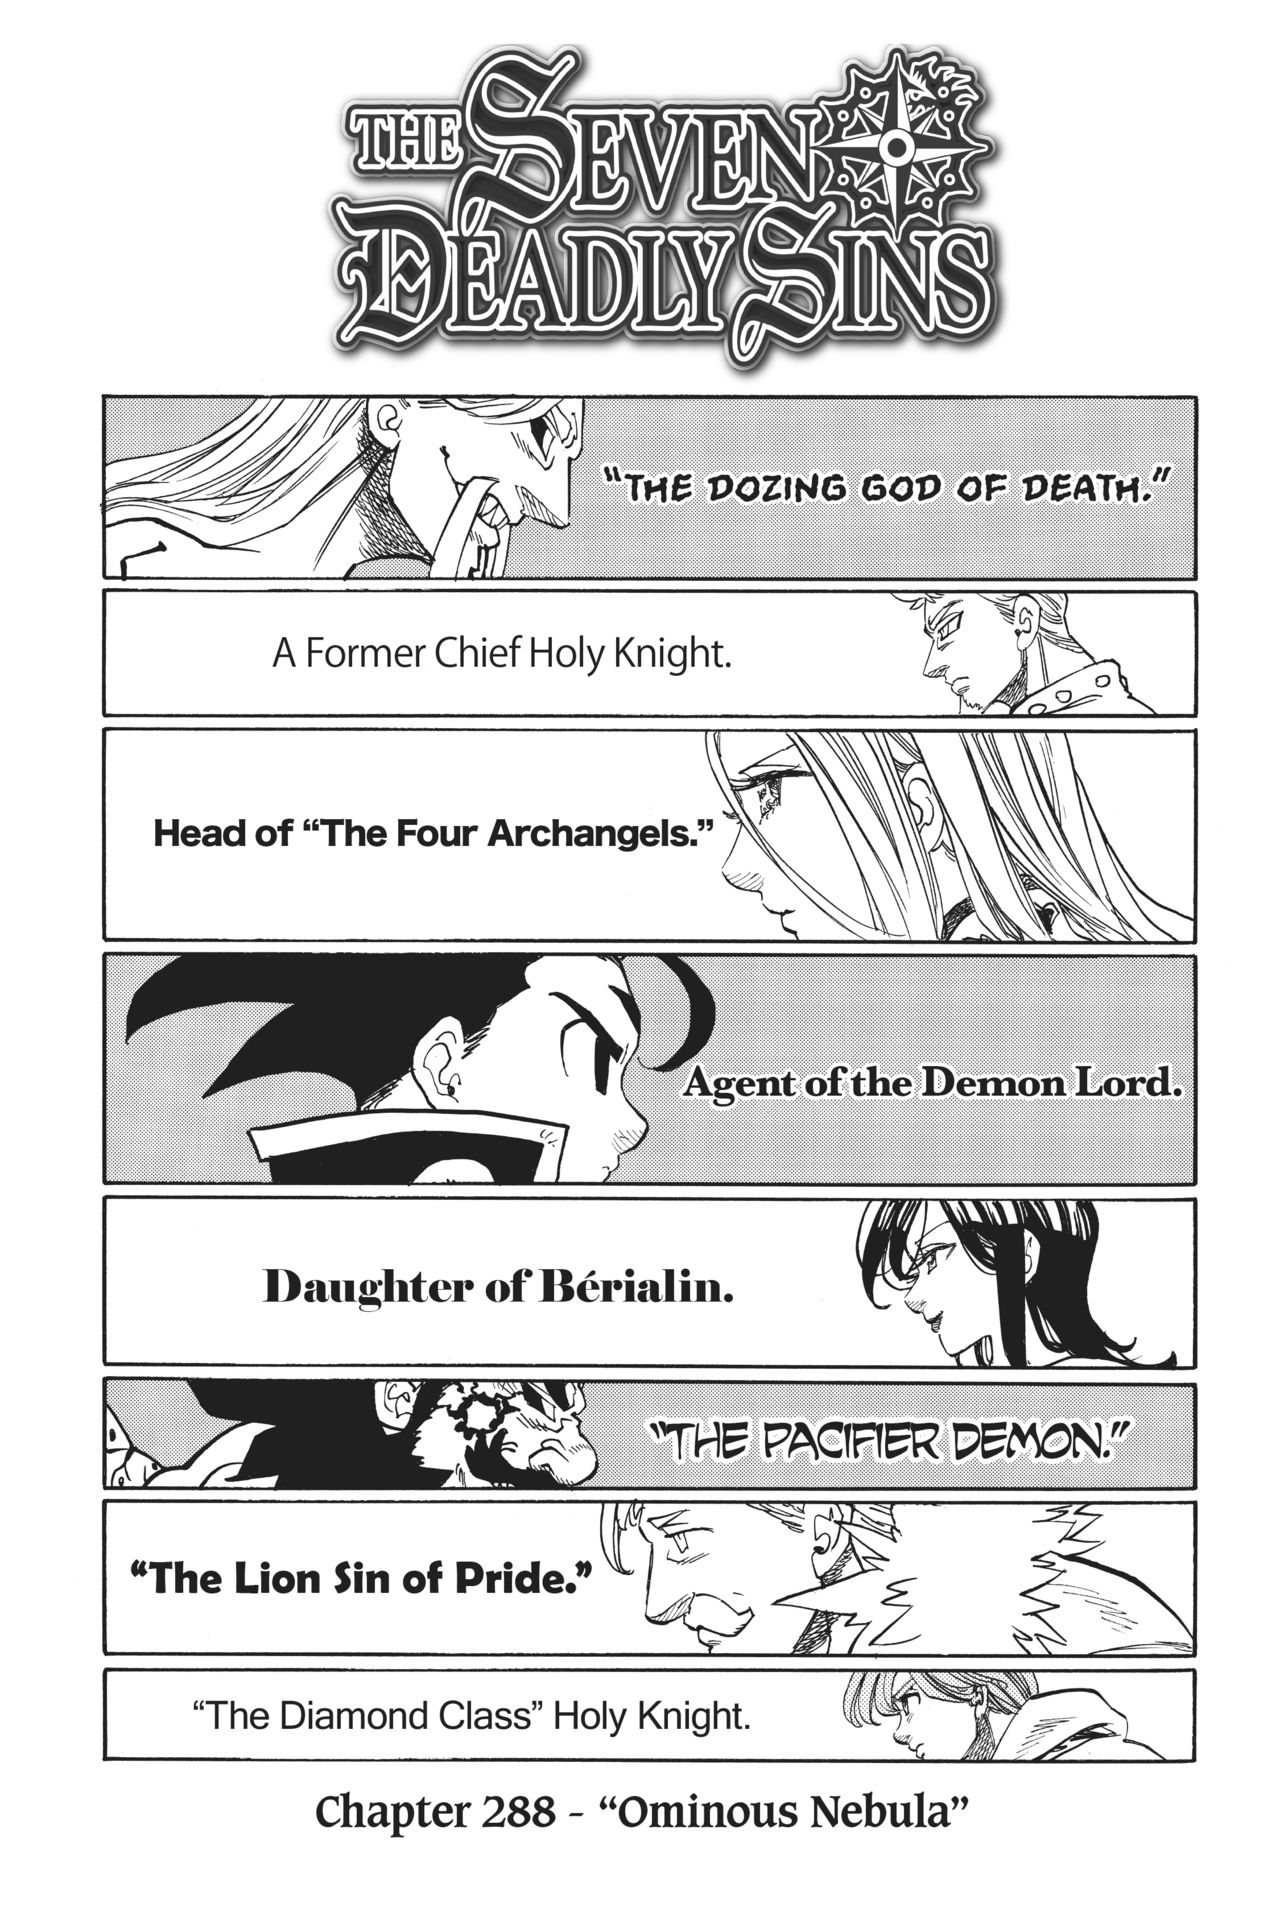 The Seven Deadly Sins (Covers & Chapter Title Cards) 216